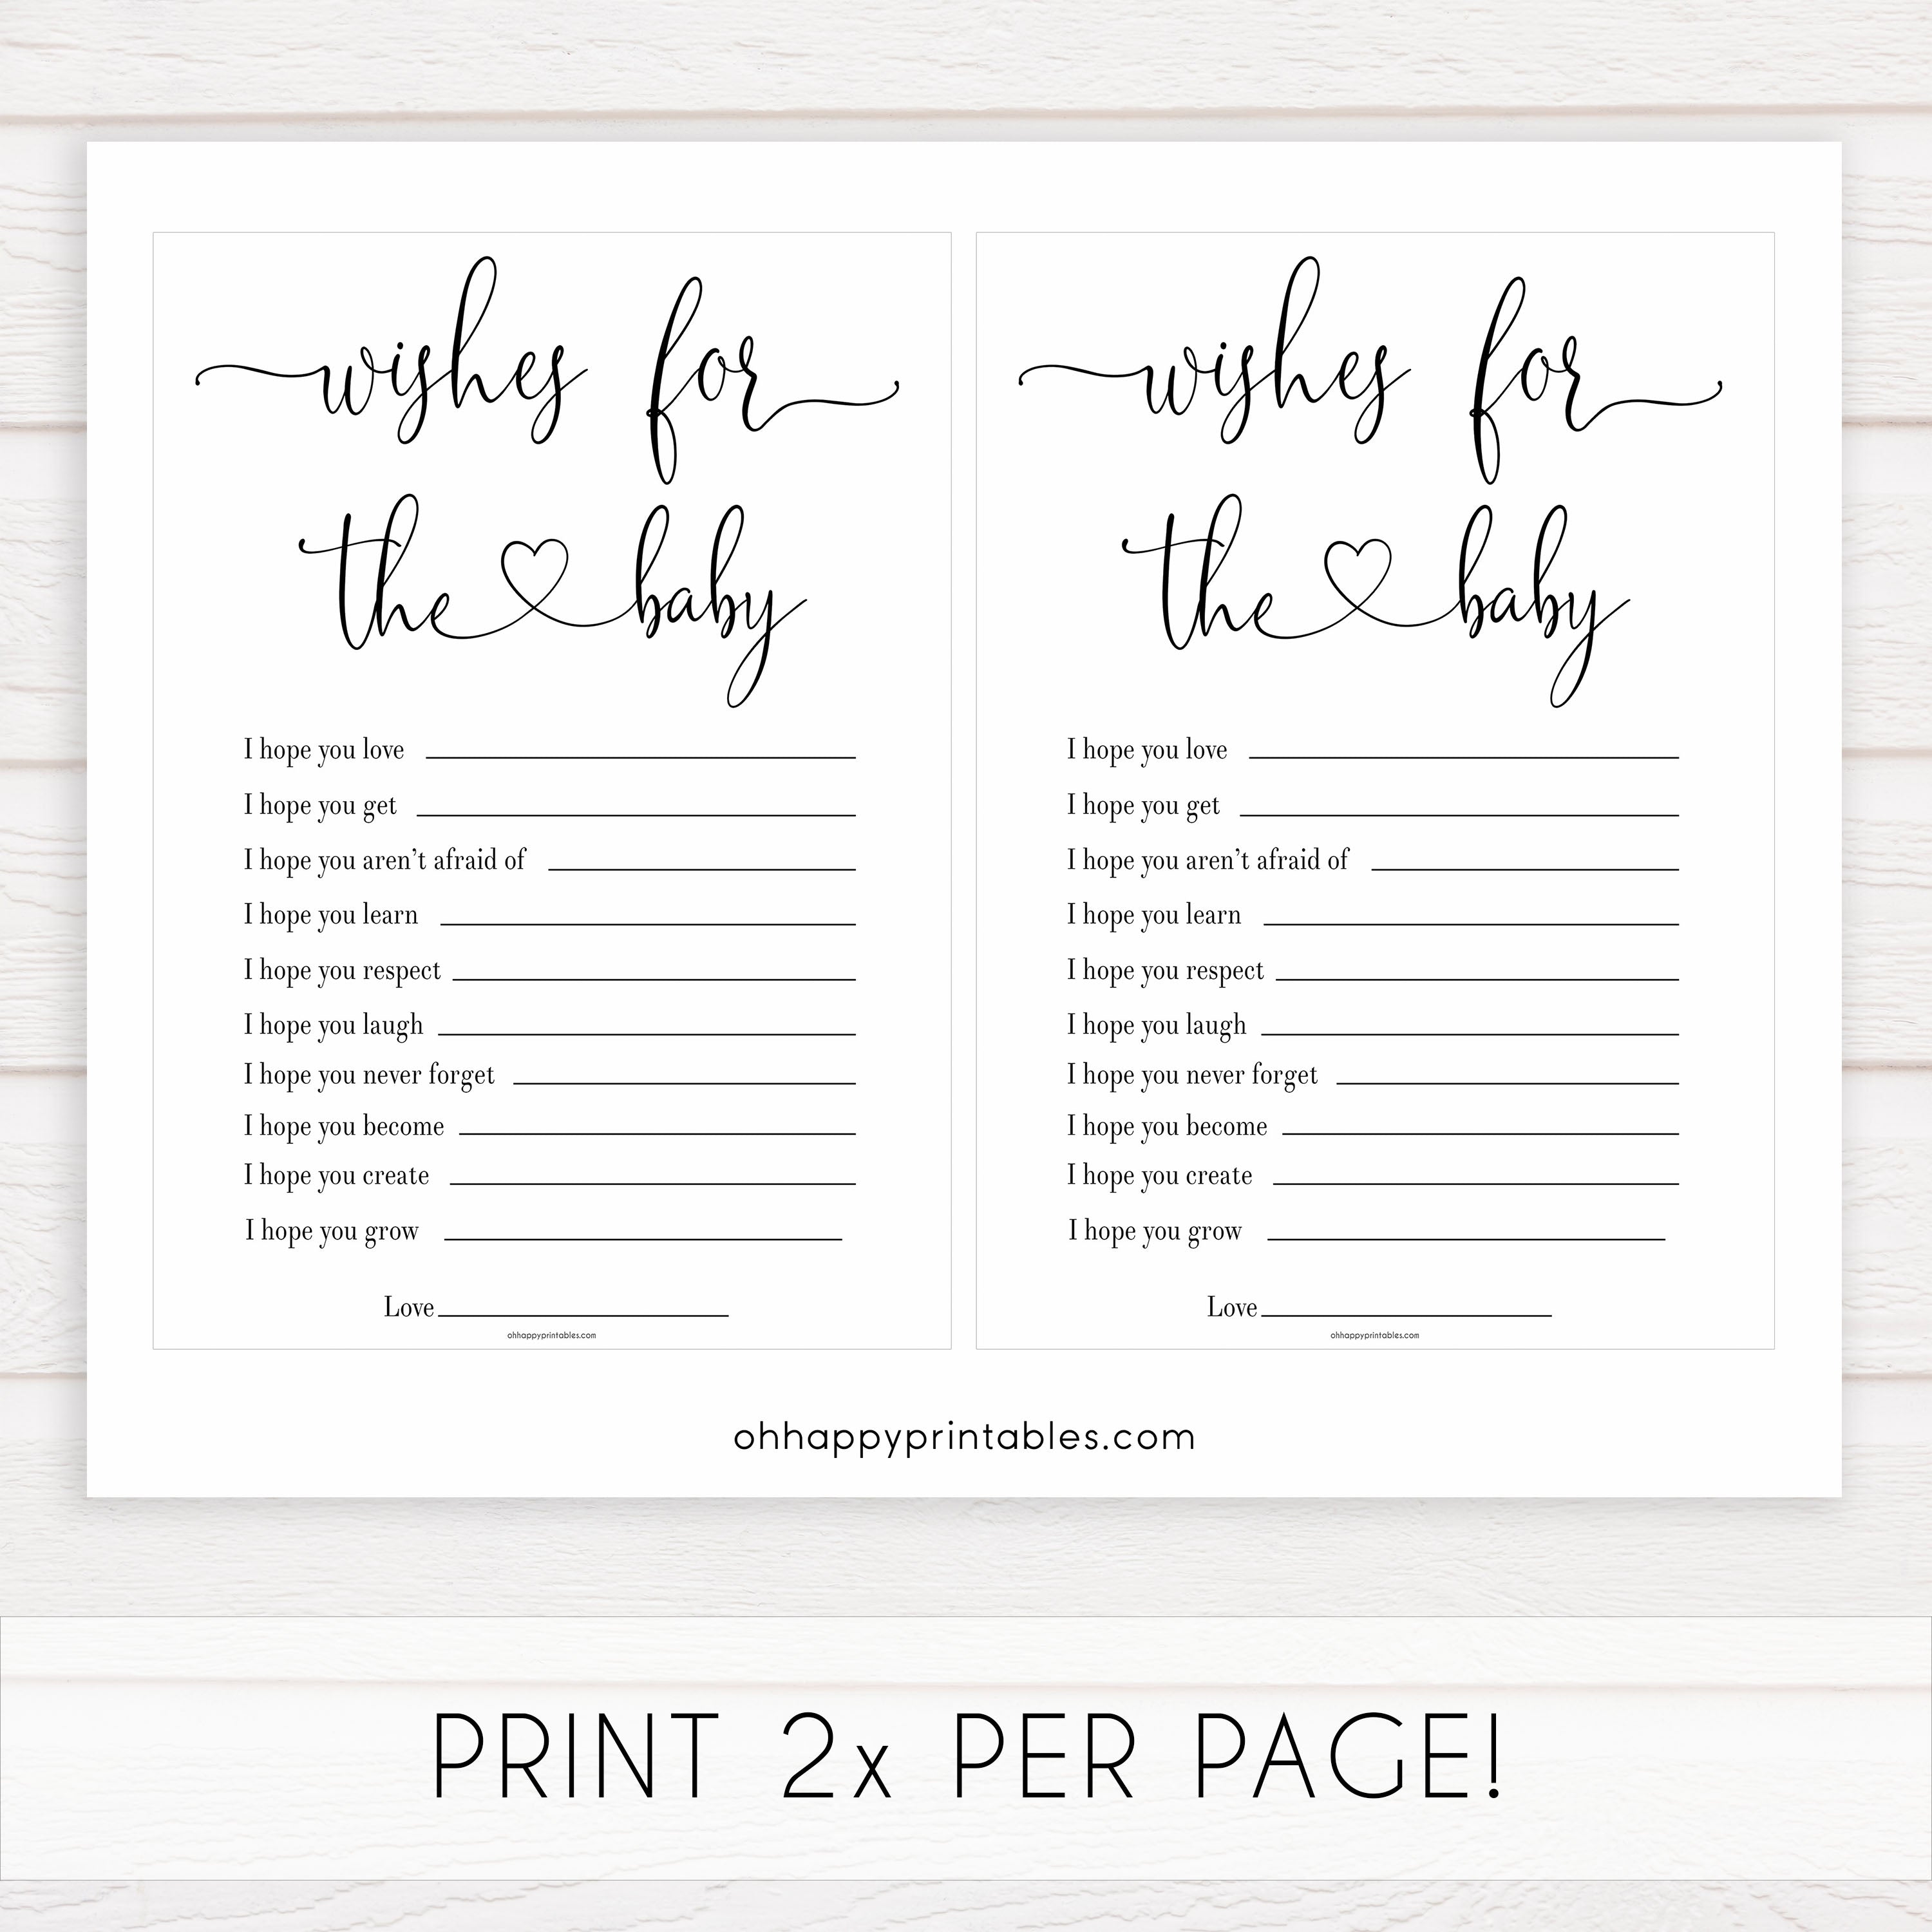 Minimalist baby shower games, wishes for the baby baby games, 10 baby game bundles, fun baby games, printable baby games, top baby games, popular baby games, labor or porn games, neutral baby games, gender reveal games